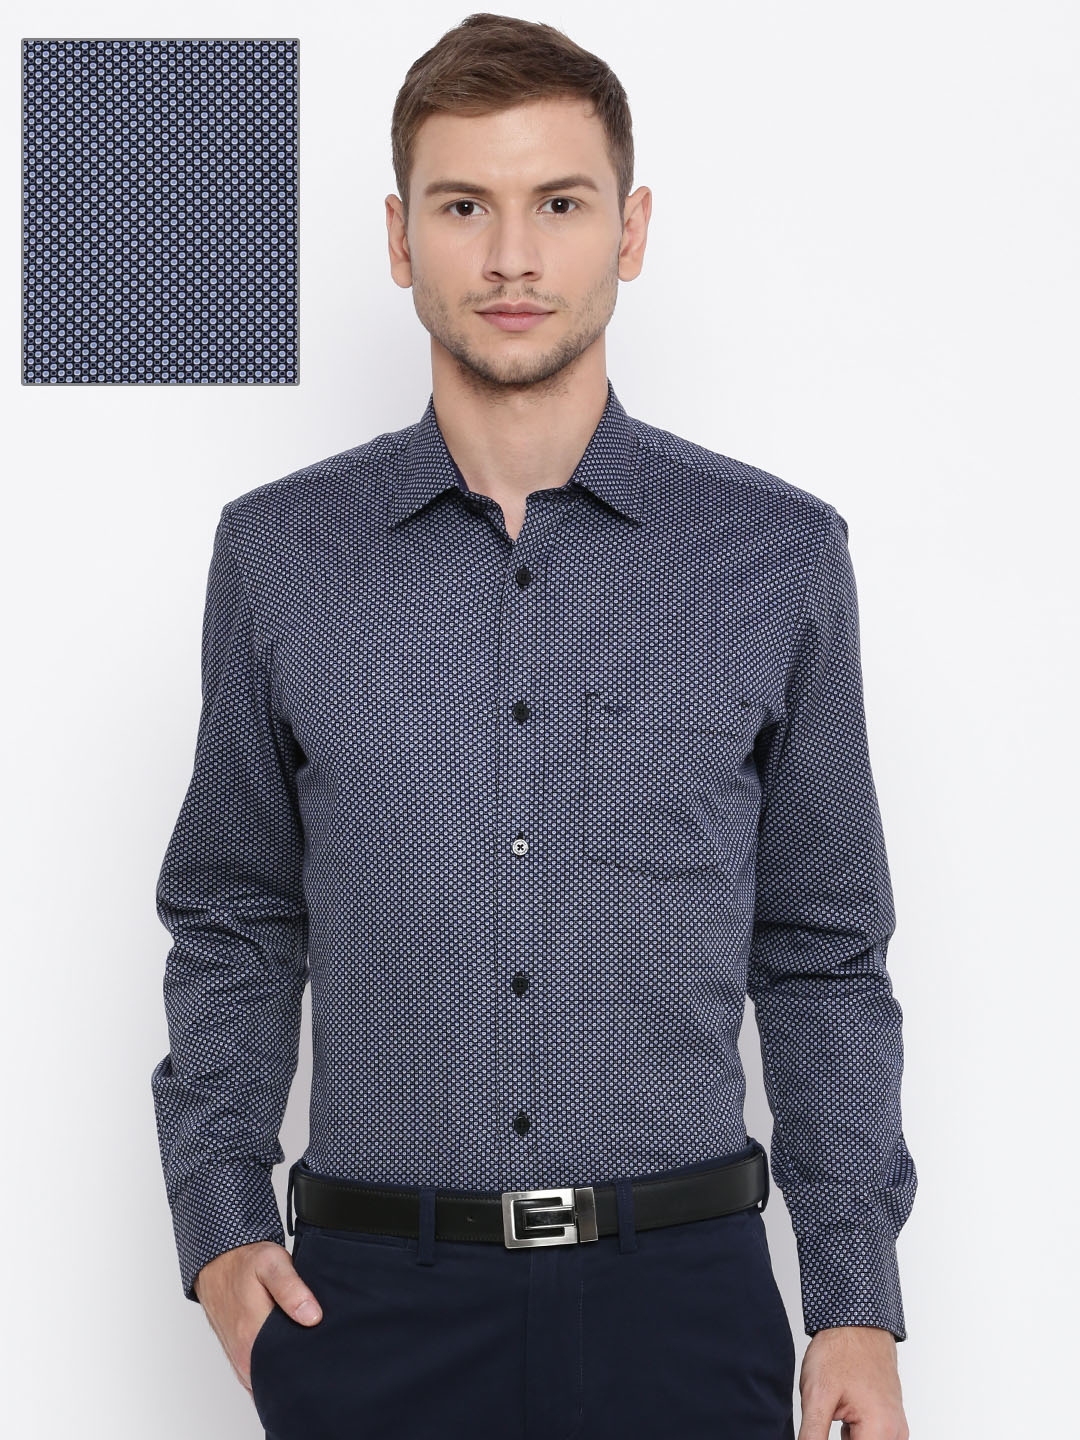 Buy CP GM Shirt TAILORED FIT FULL SLEEVE - Shirts for Men 1793152 | Myntra